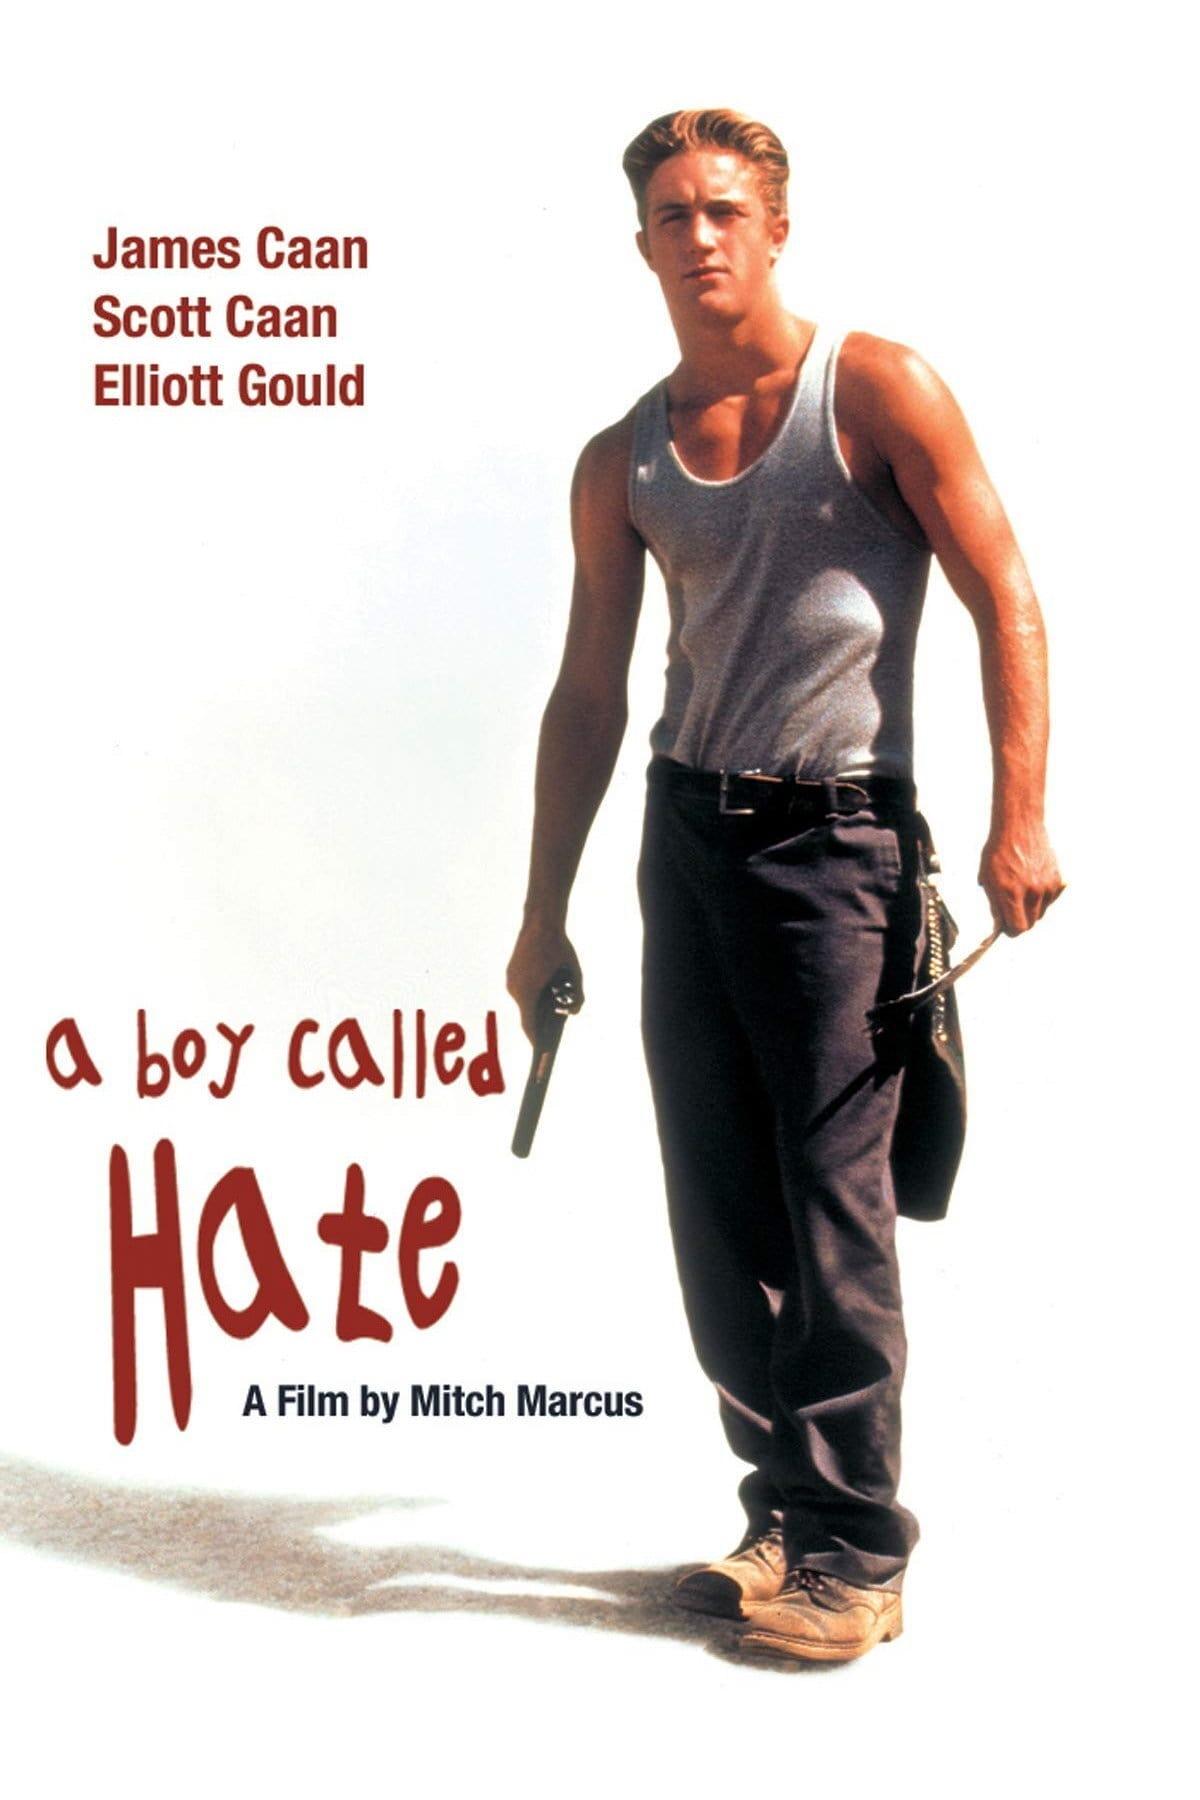 A Boy Called Hate poster